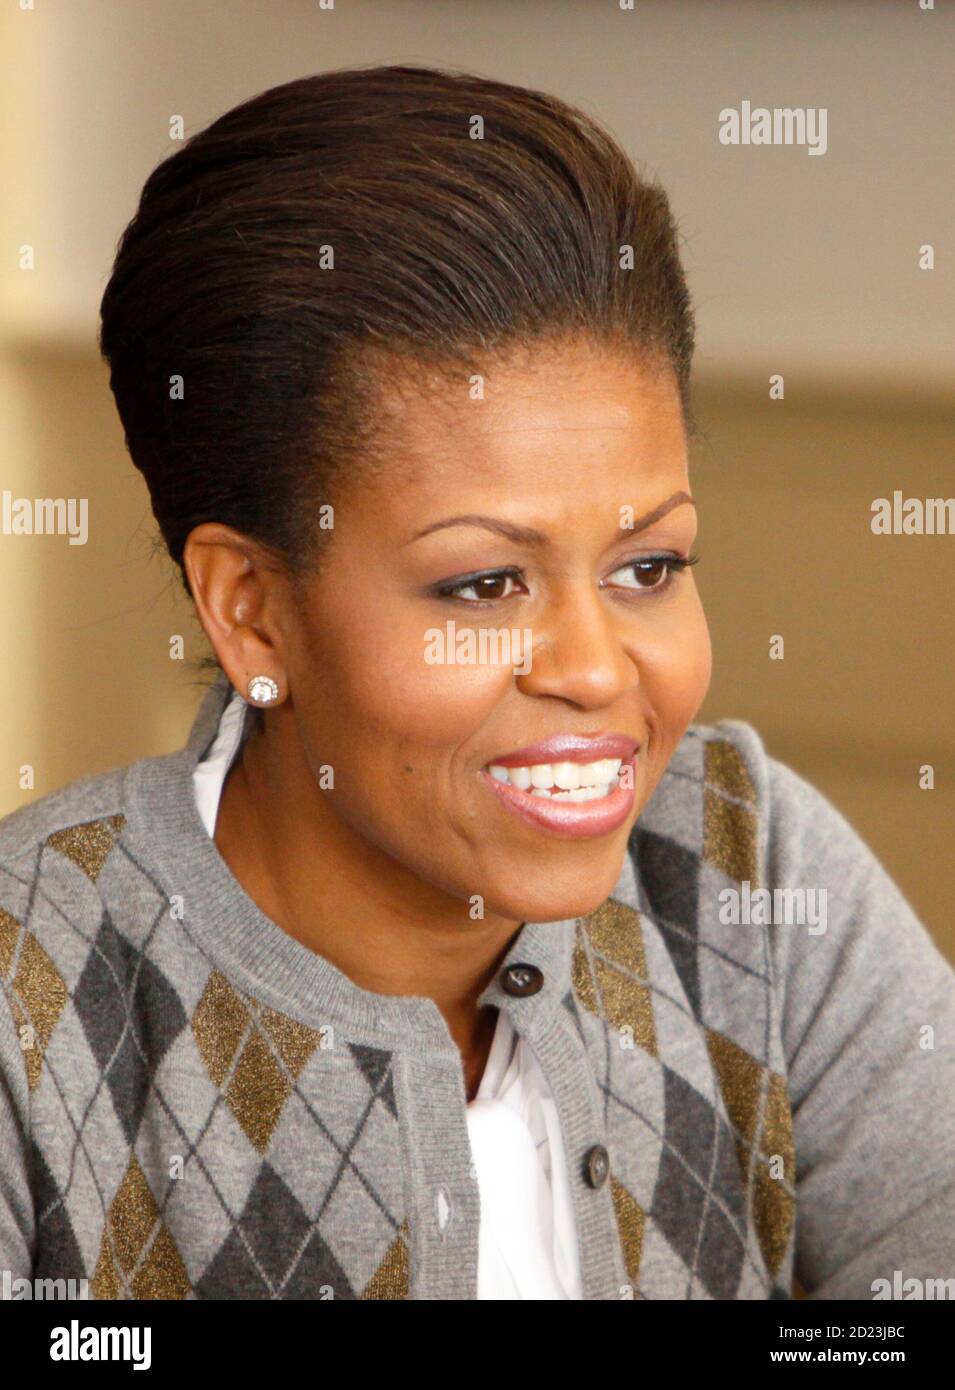 U.S. first lady Michelle Obama talks to others at her table at a Girls Mentoring Luncheon at the Governor's Mansion in Denver, Colorado November 16, 2009. REUTERS/Rick Wilking (UNITED STATES POLITICS HEADSHOT EDUCATION) Stock Photo